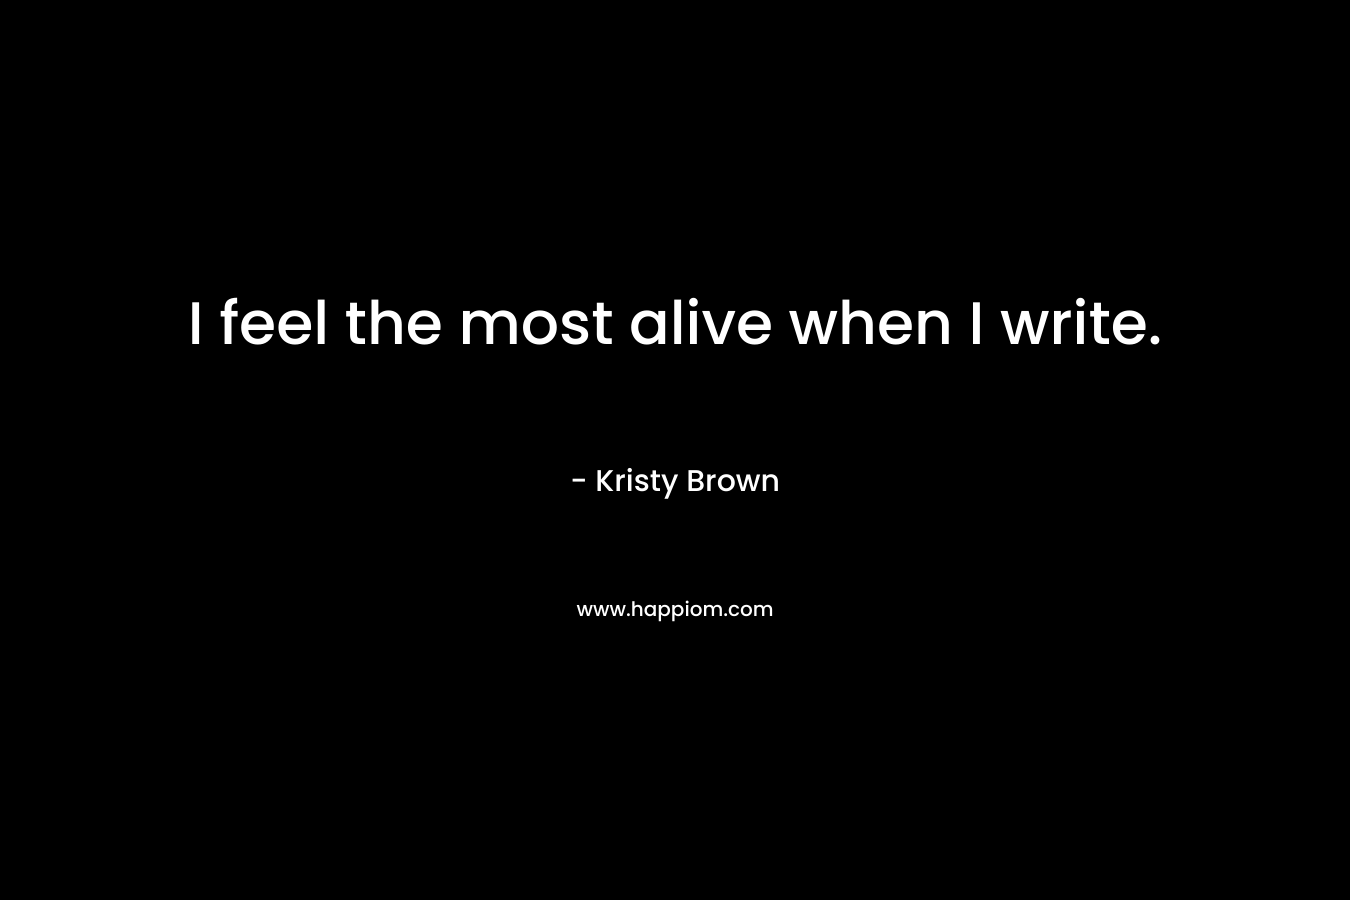 I feel the most alive when I write.